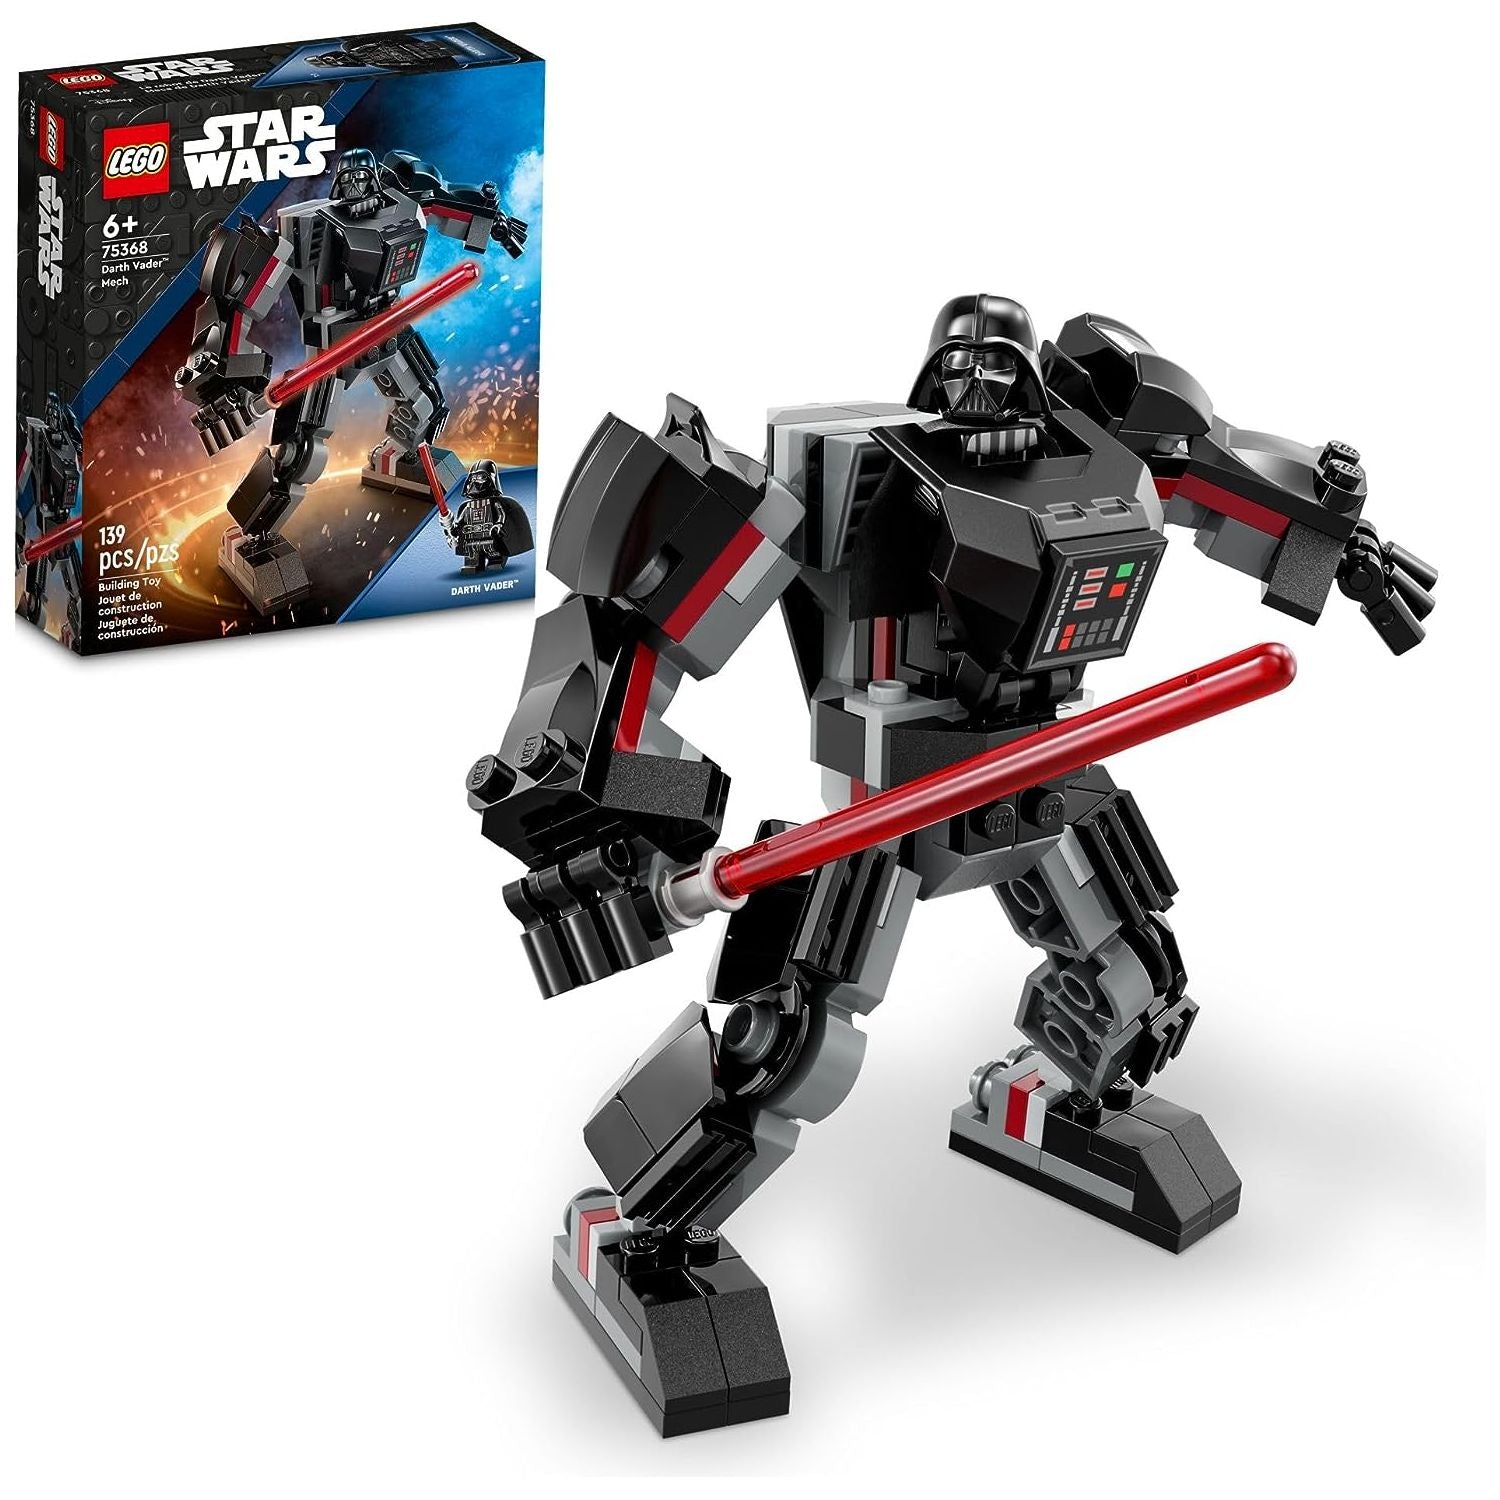 LEGO 75368  Star Wars Darth Vader Mech Buildable Star Wars Action Figure, This Collectible Star Wars Toy for Kids Ages 6 and Up Features an Opening Cockpit, Buildable Lightsaber and 1 Minifigure